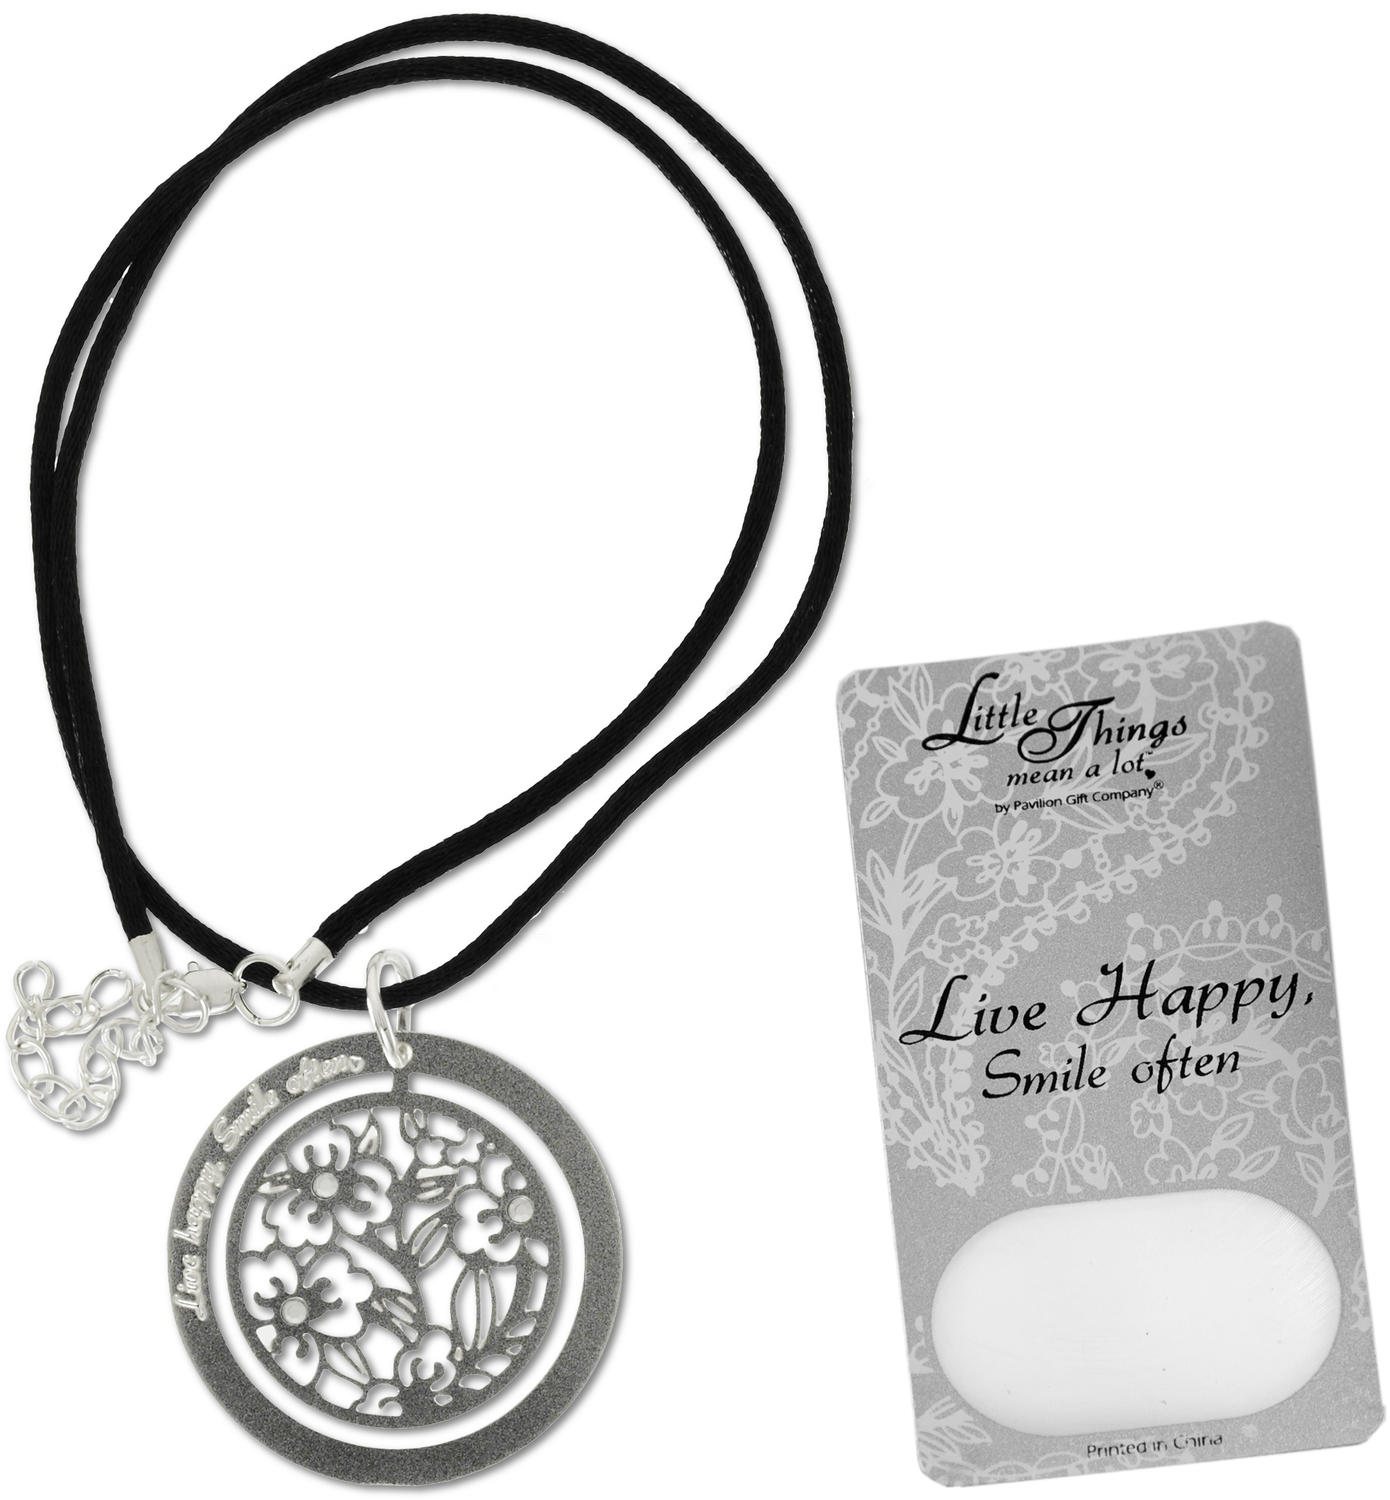 Live Happy by Little Things Mean A Lot - Live Happy - With 1.5" Circle Pendant